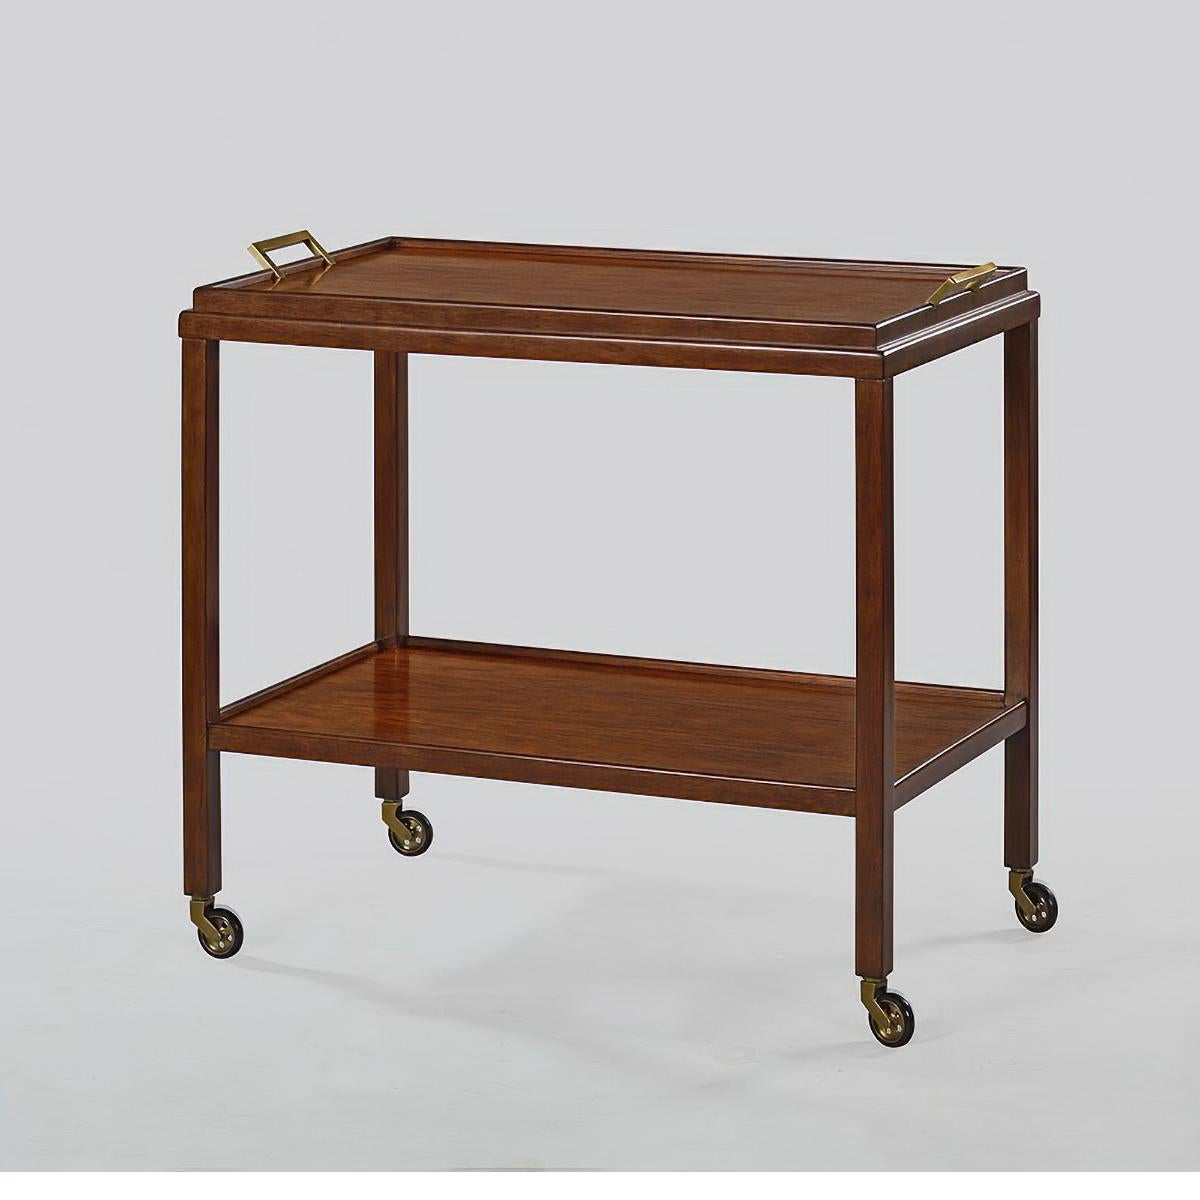 Mid-Century Modern bar cart with removable tray and shelf has hand-cast brass hardware and brass wheels with floor protective tread having a “rustic” warm brown walnut finish with subtle visual distressing and hand-rubbed finish.

Dimensions: 33